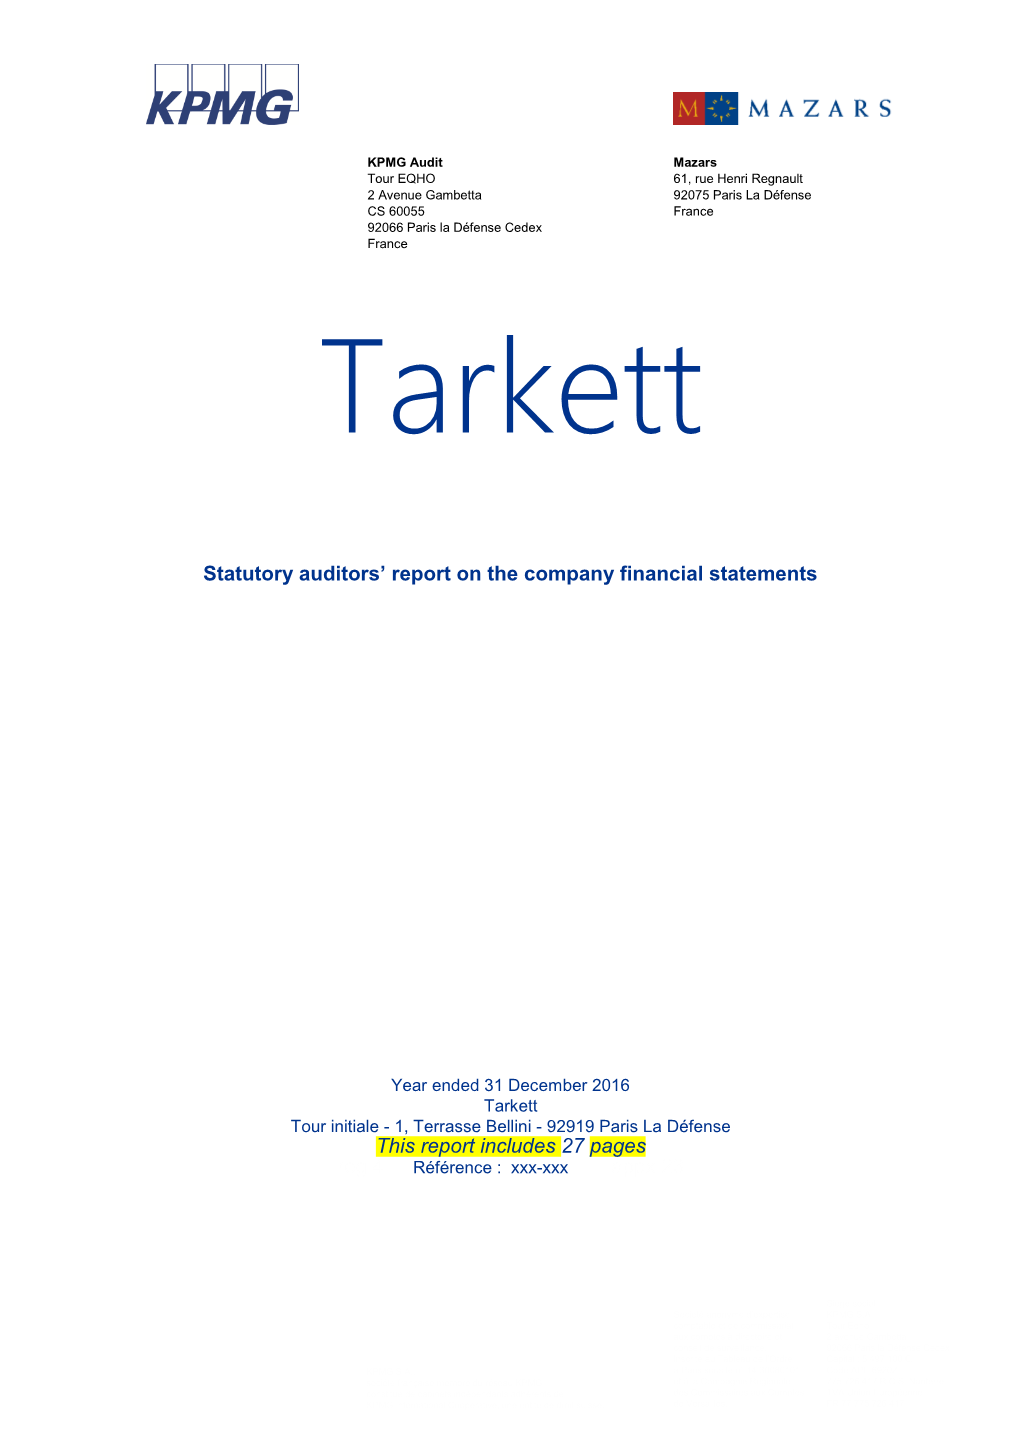 Statutory Auditors' Report on the 2016 Company Financial